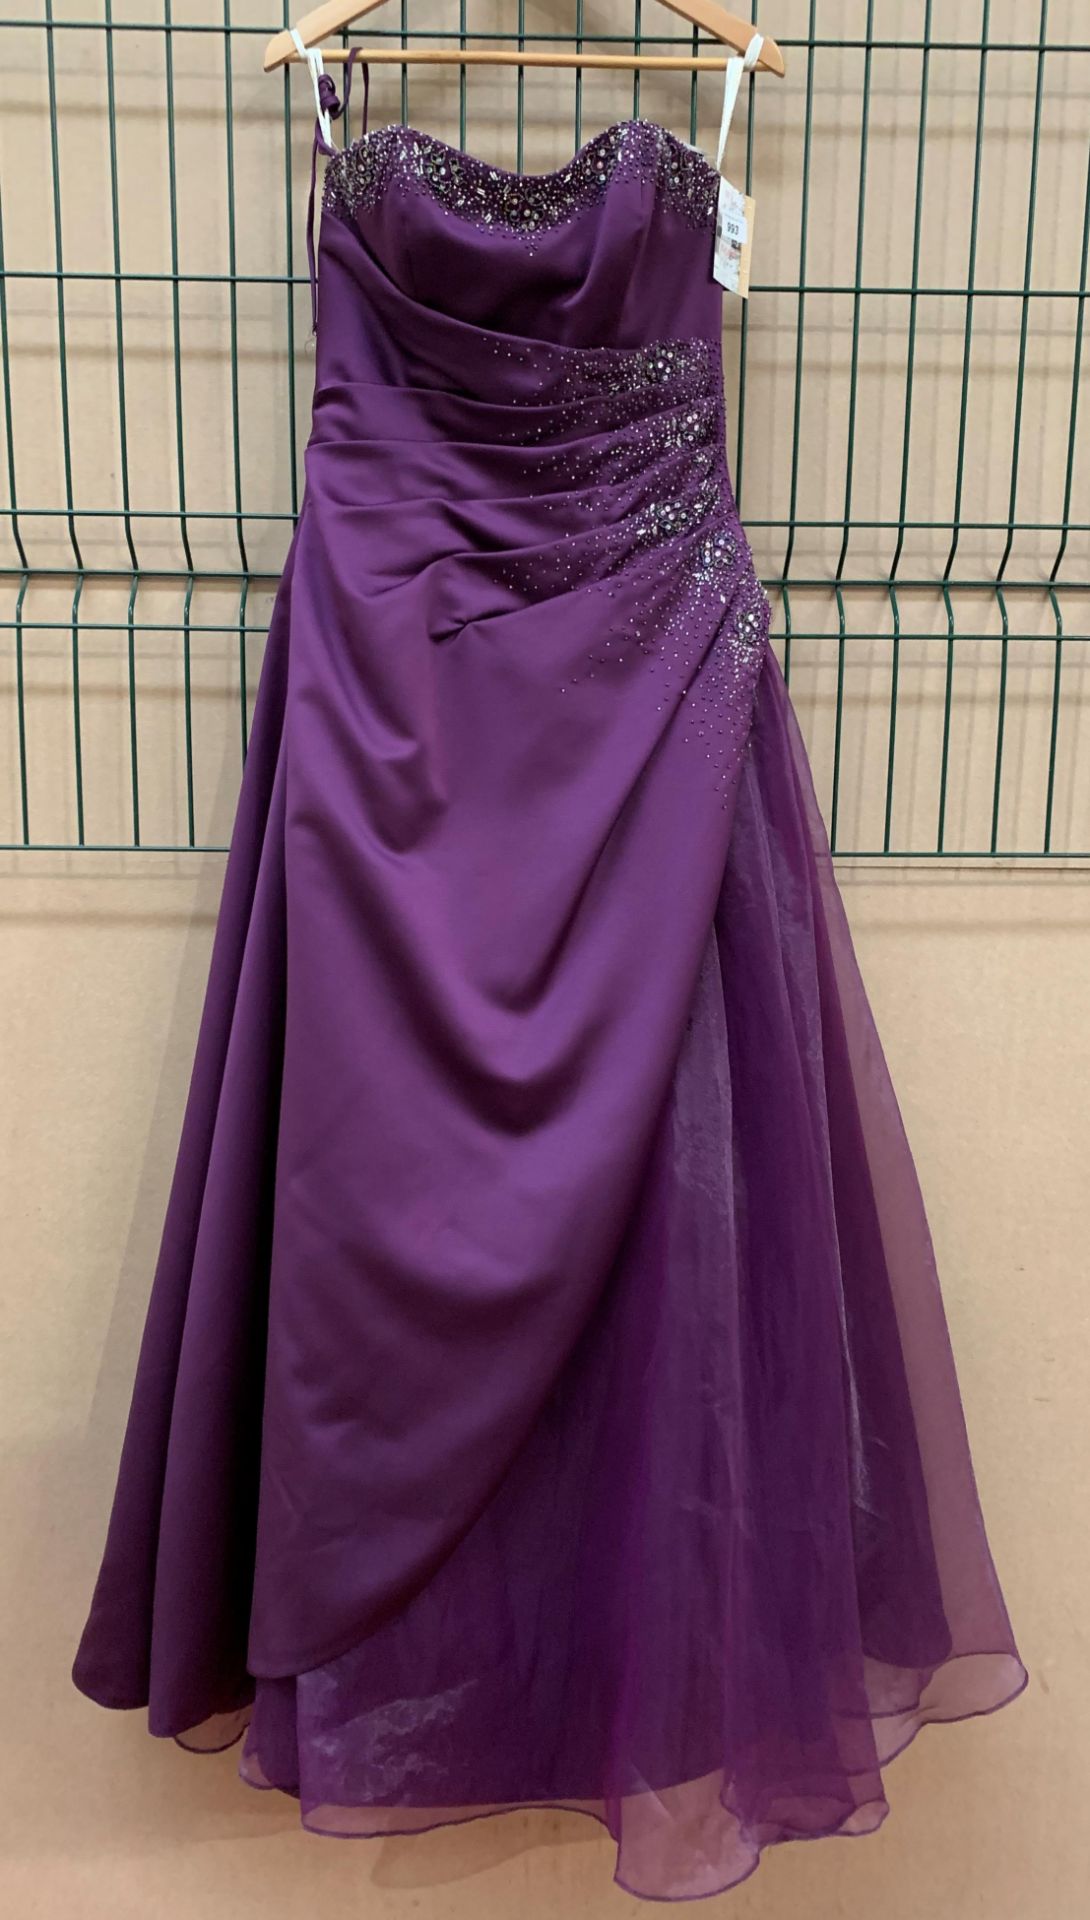 A bridesmaid/prom dress by Forever Yours, Chloe, passion, size 8,